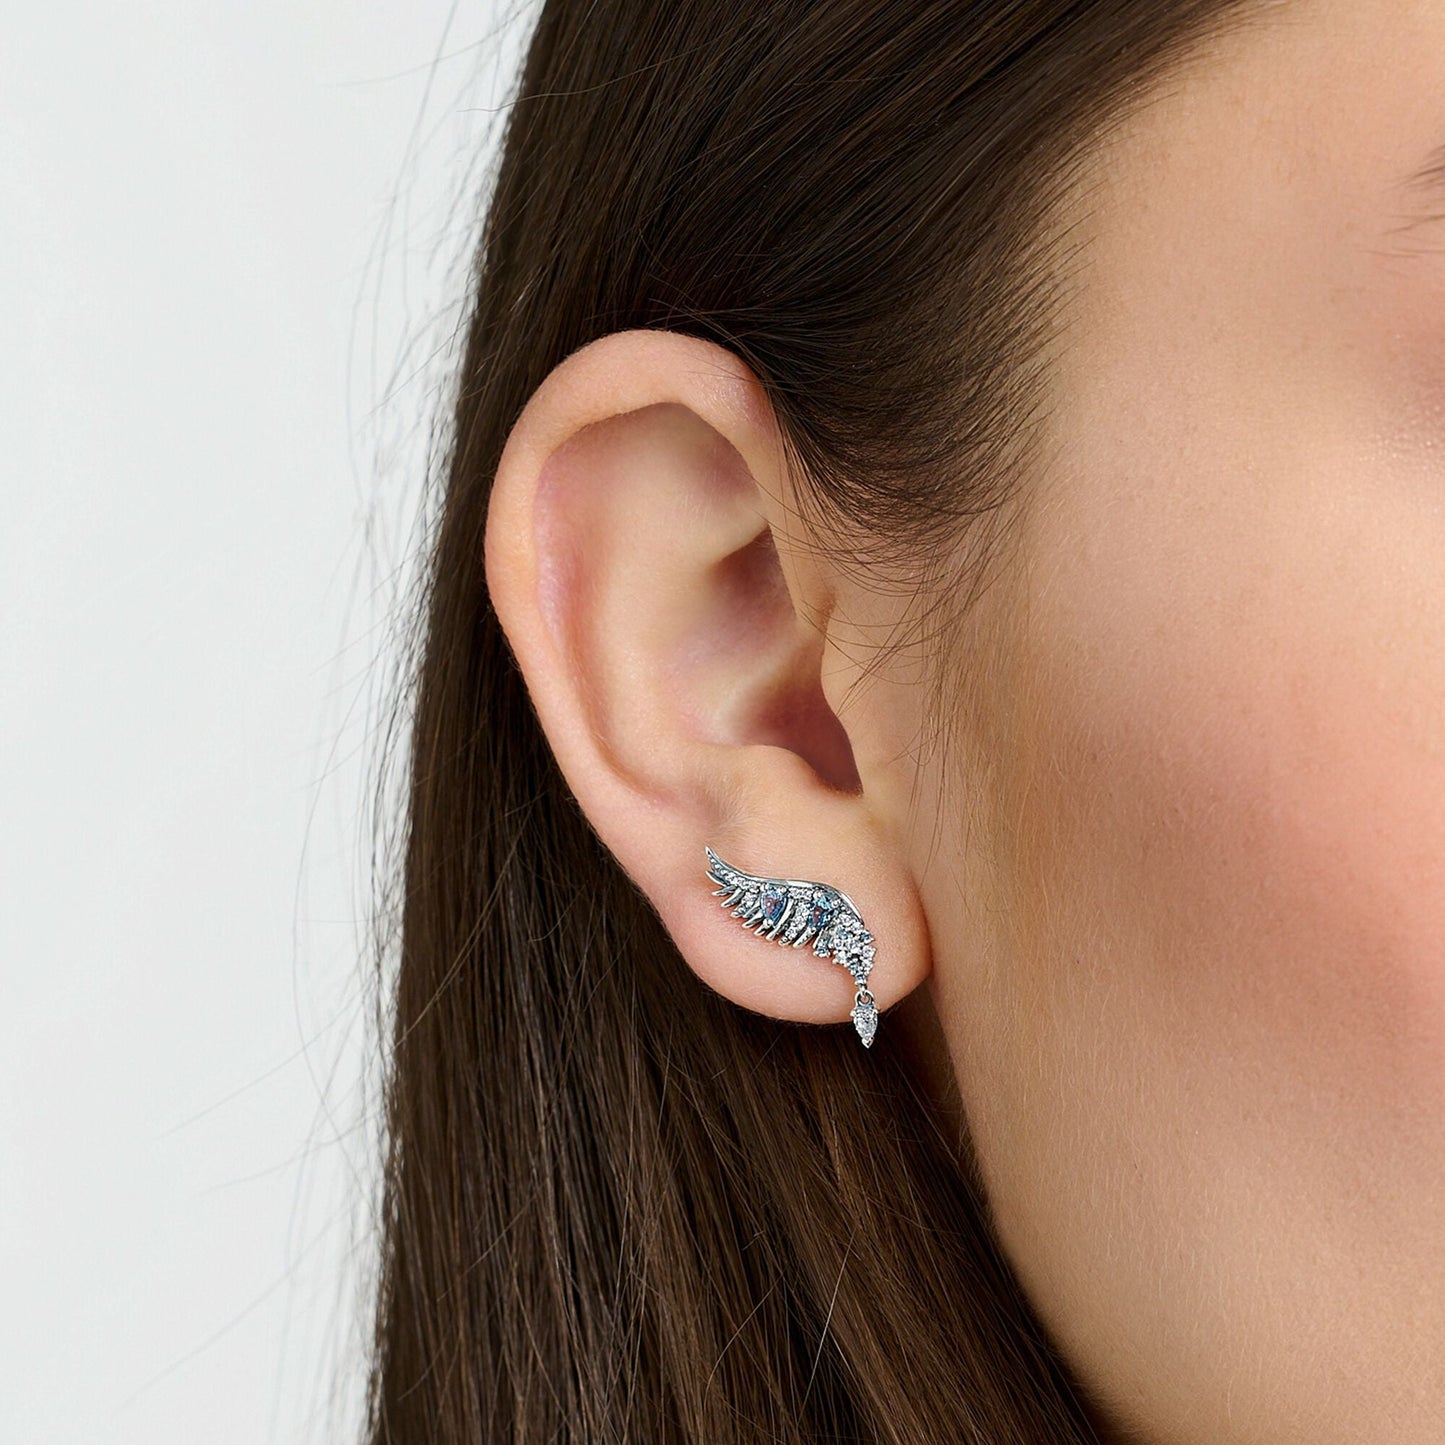 THOMAS SABO Ear studs phoenix wing with blue stones silver